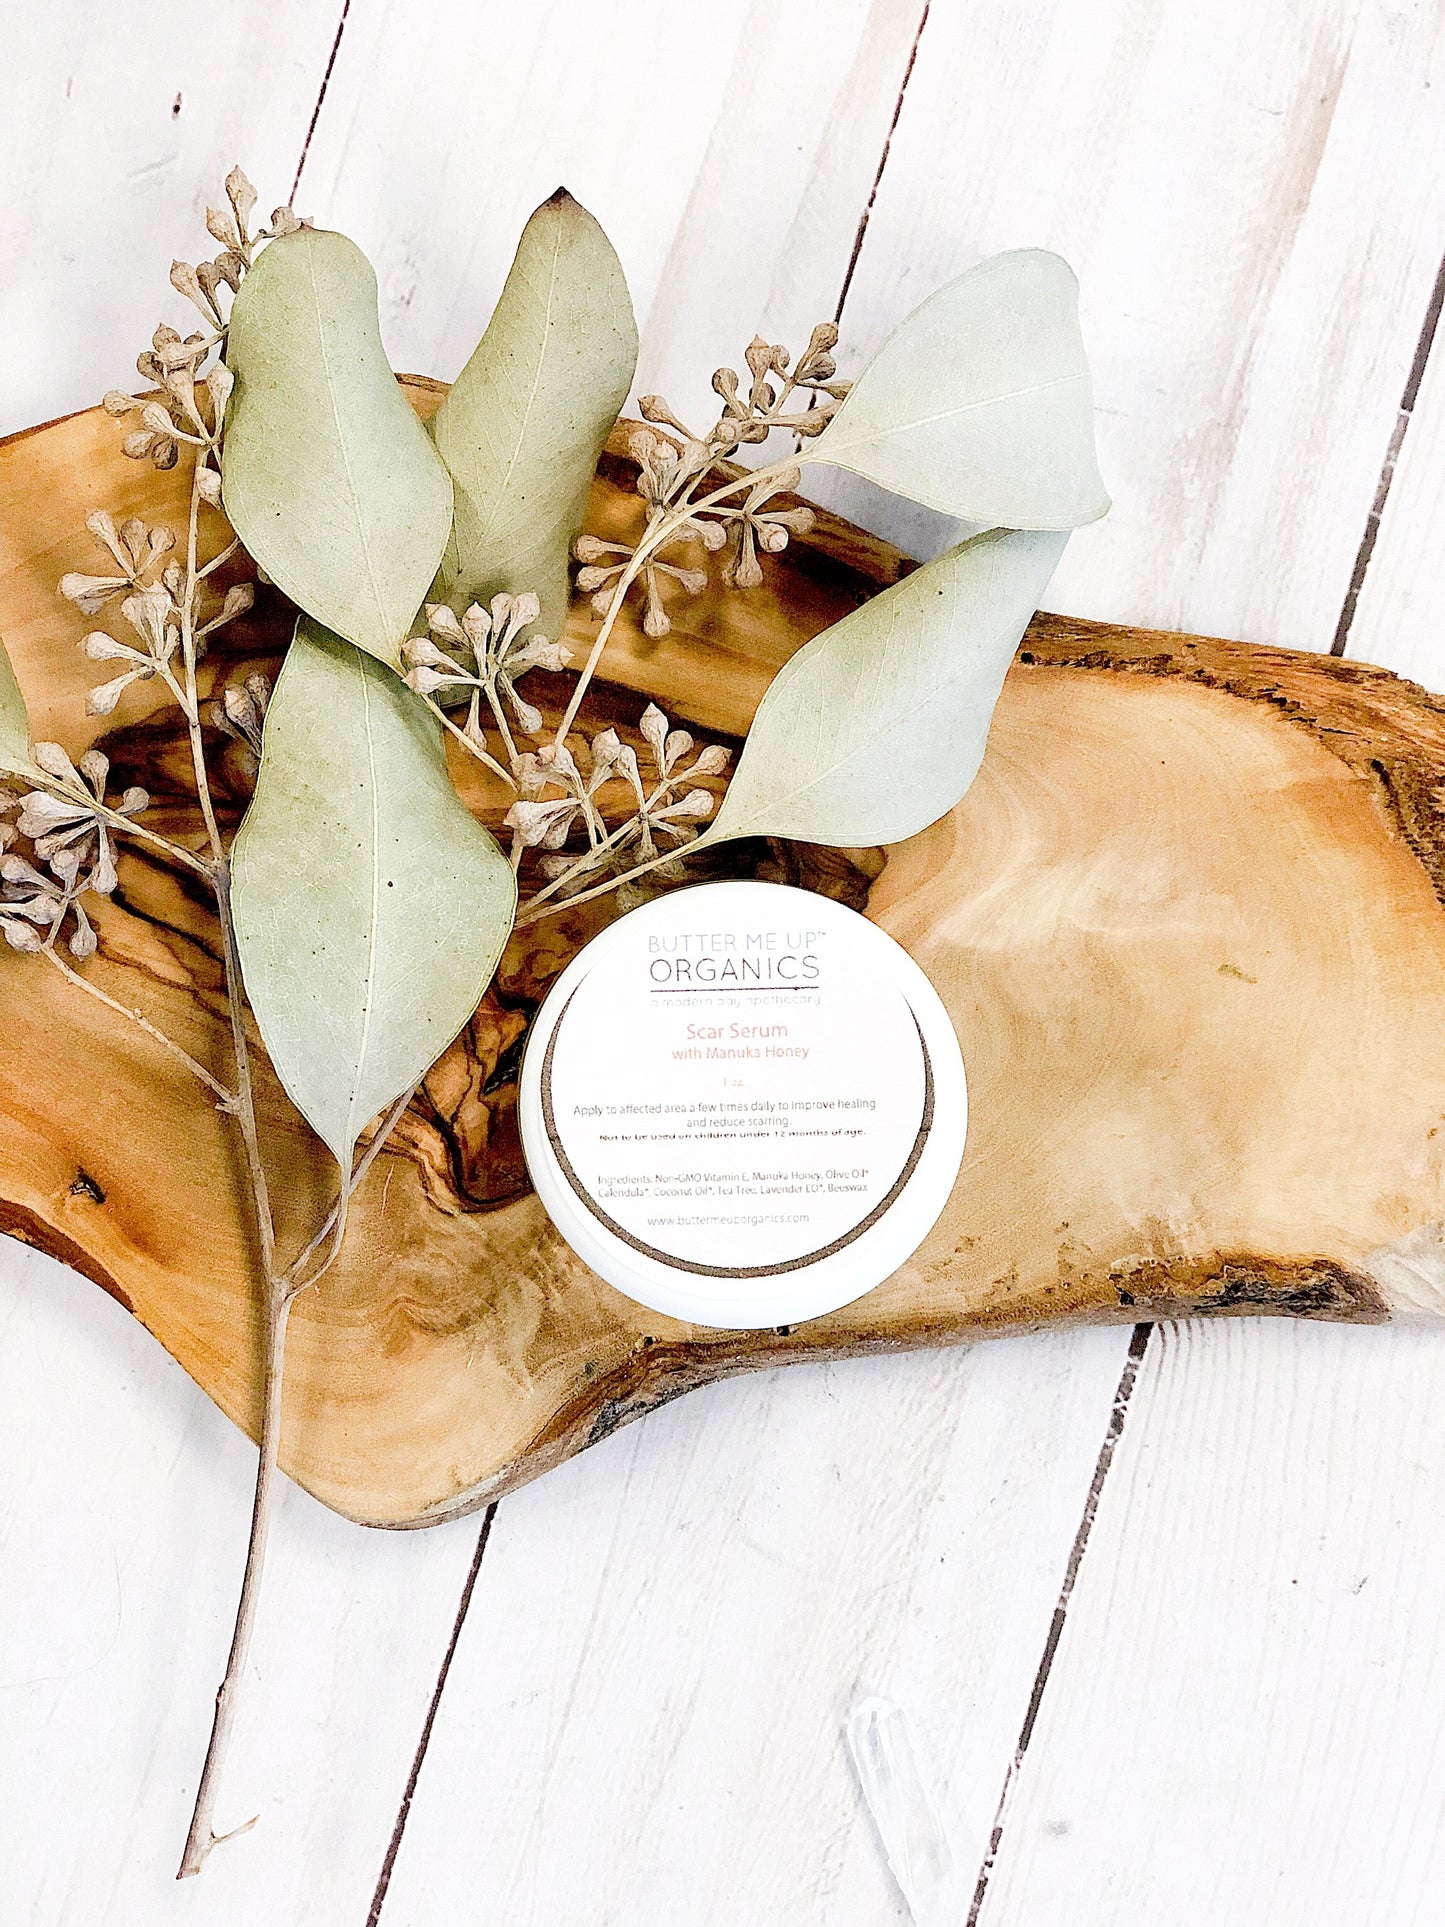 A round container labeled "White Smokey Scar Serum" placed on a wooden tray with dried leaves and a white background, featuring organic skincare ingredients like Manuka Honey for an added boost.